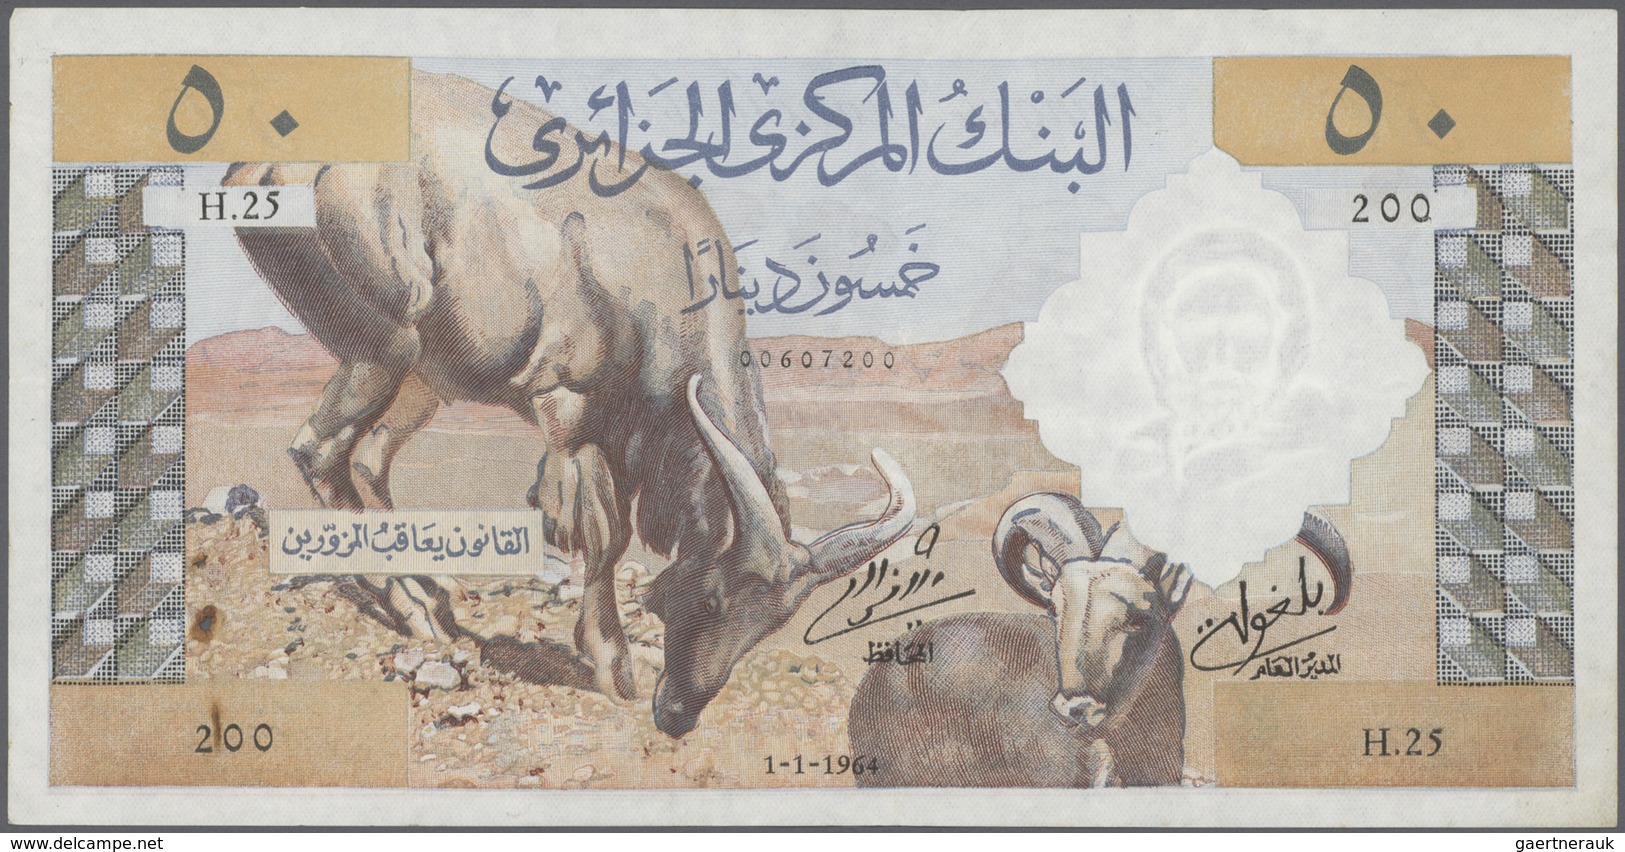 Algeria / Algerien: Set Of 2 Notes 50 Dinars 1964 P. 124, Both In Lightly Used Condition, Not Washed - Algérie